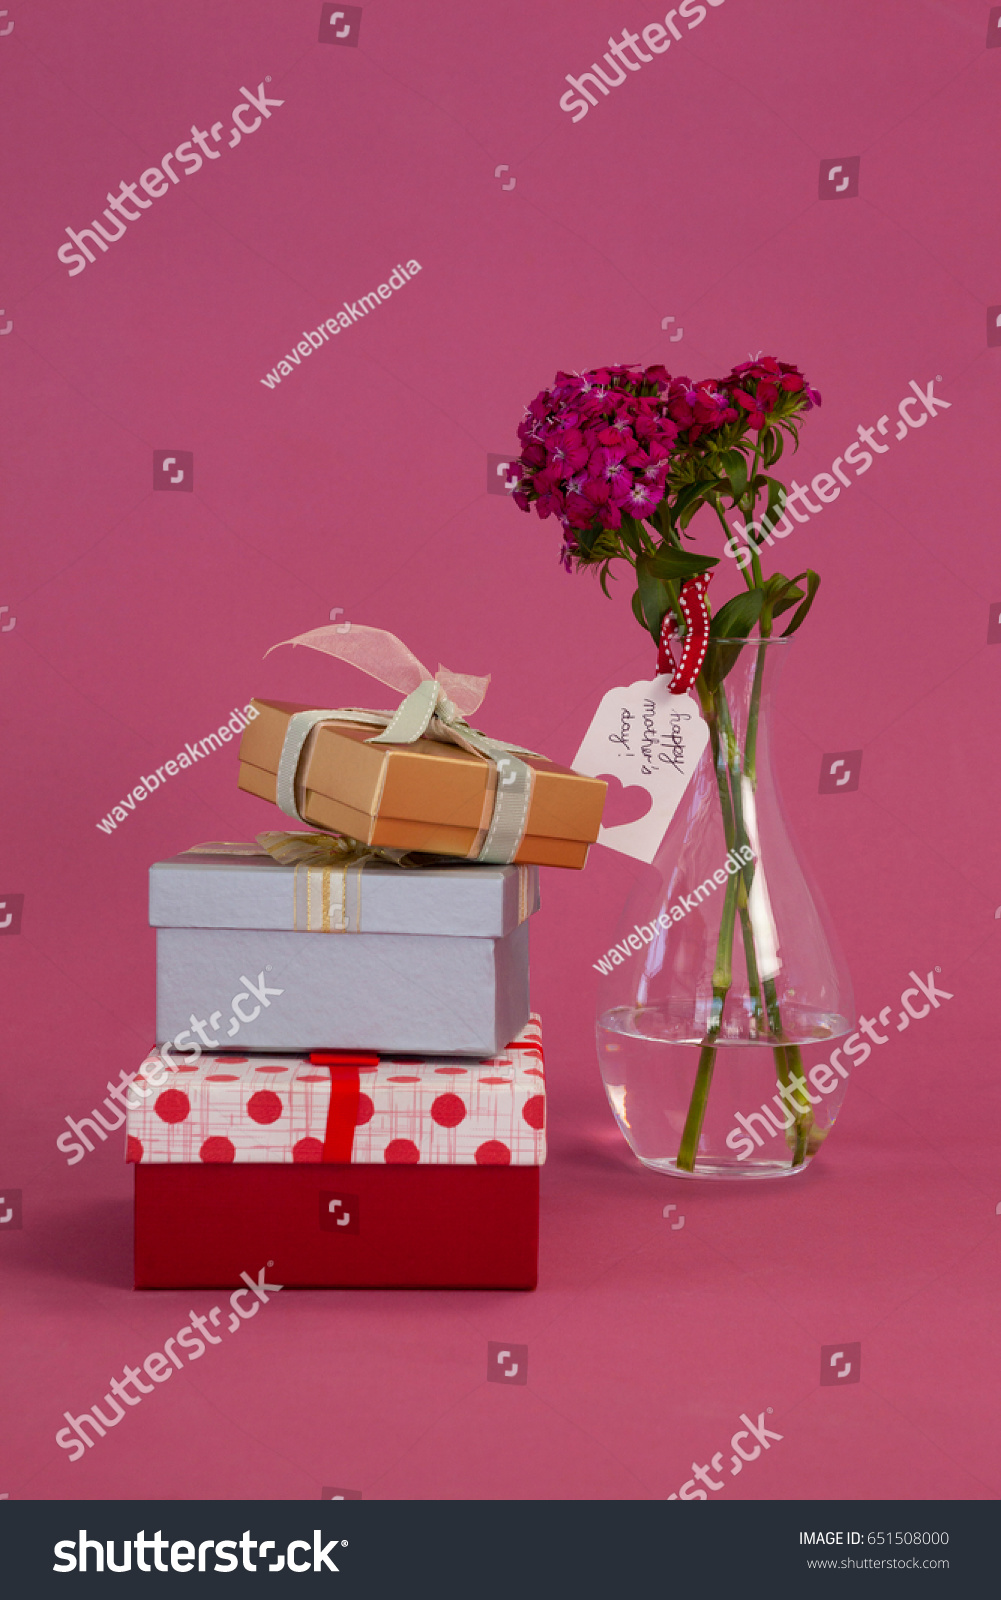 Stack of gift boxes and flowers vase on pink background #651508000